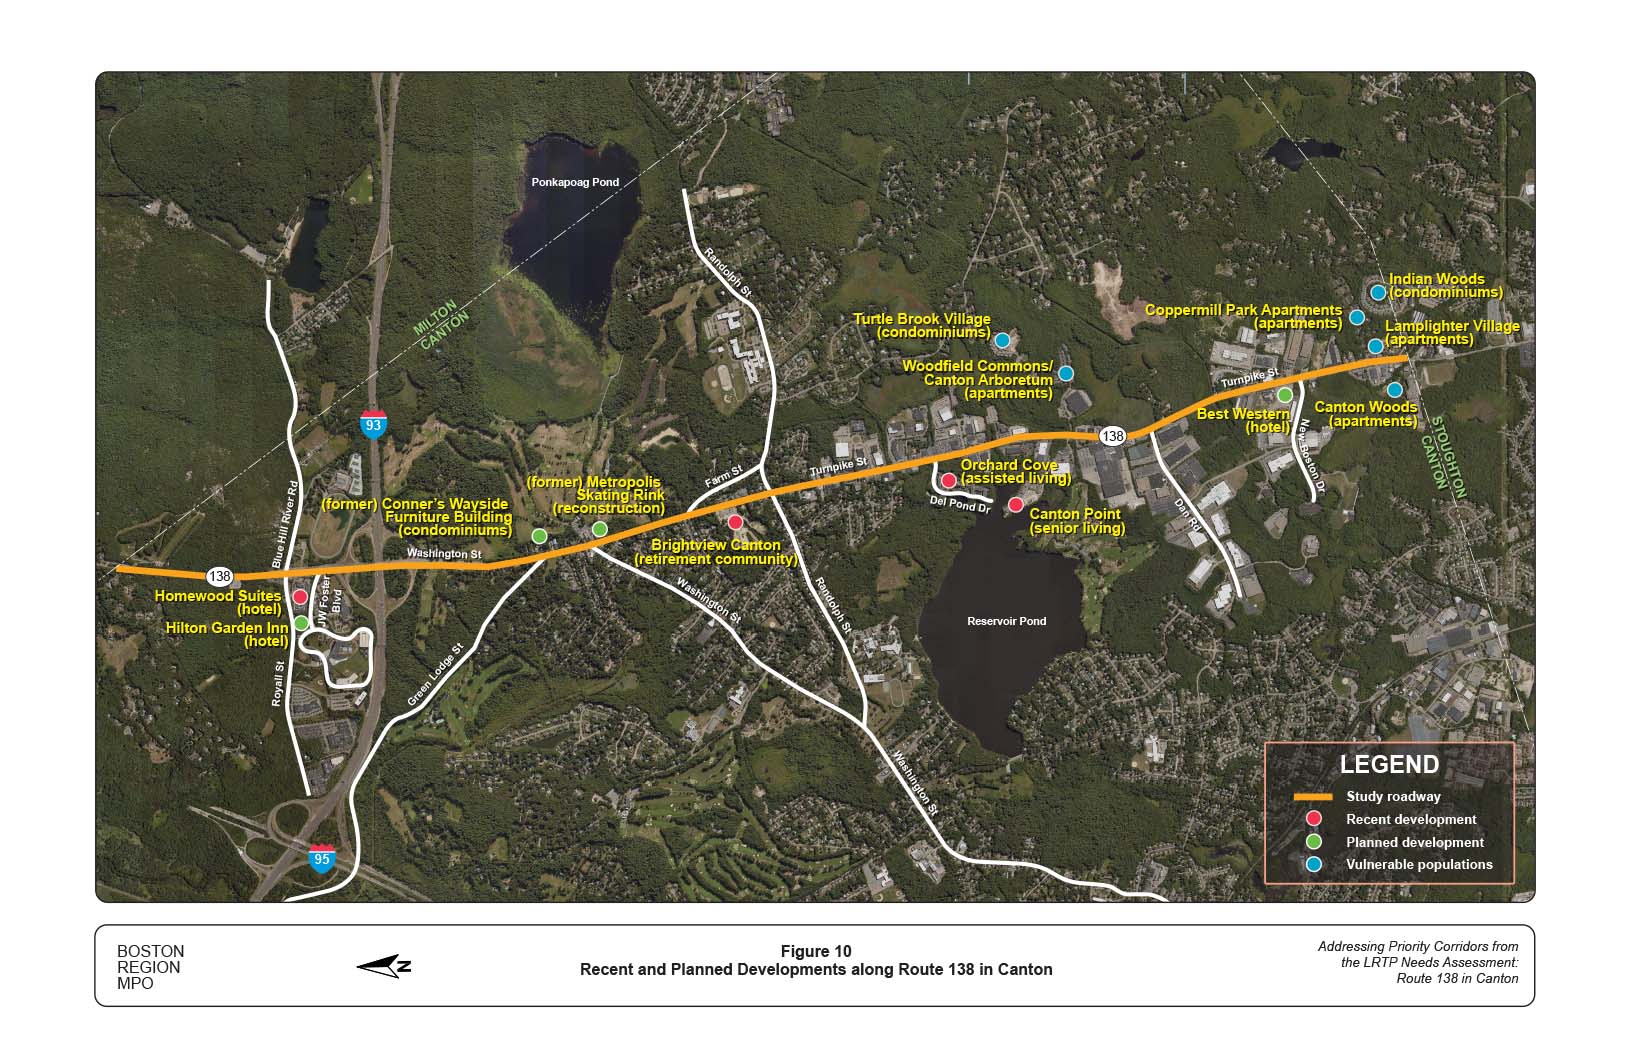 Figure 10 is a map of the study area showing recent and planned developments along Route 138.